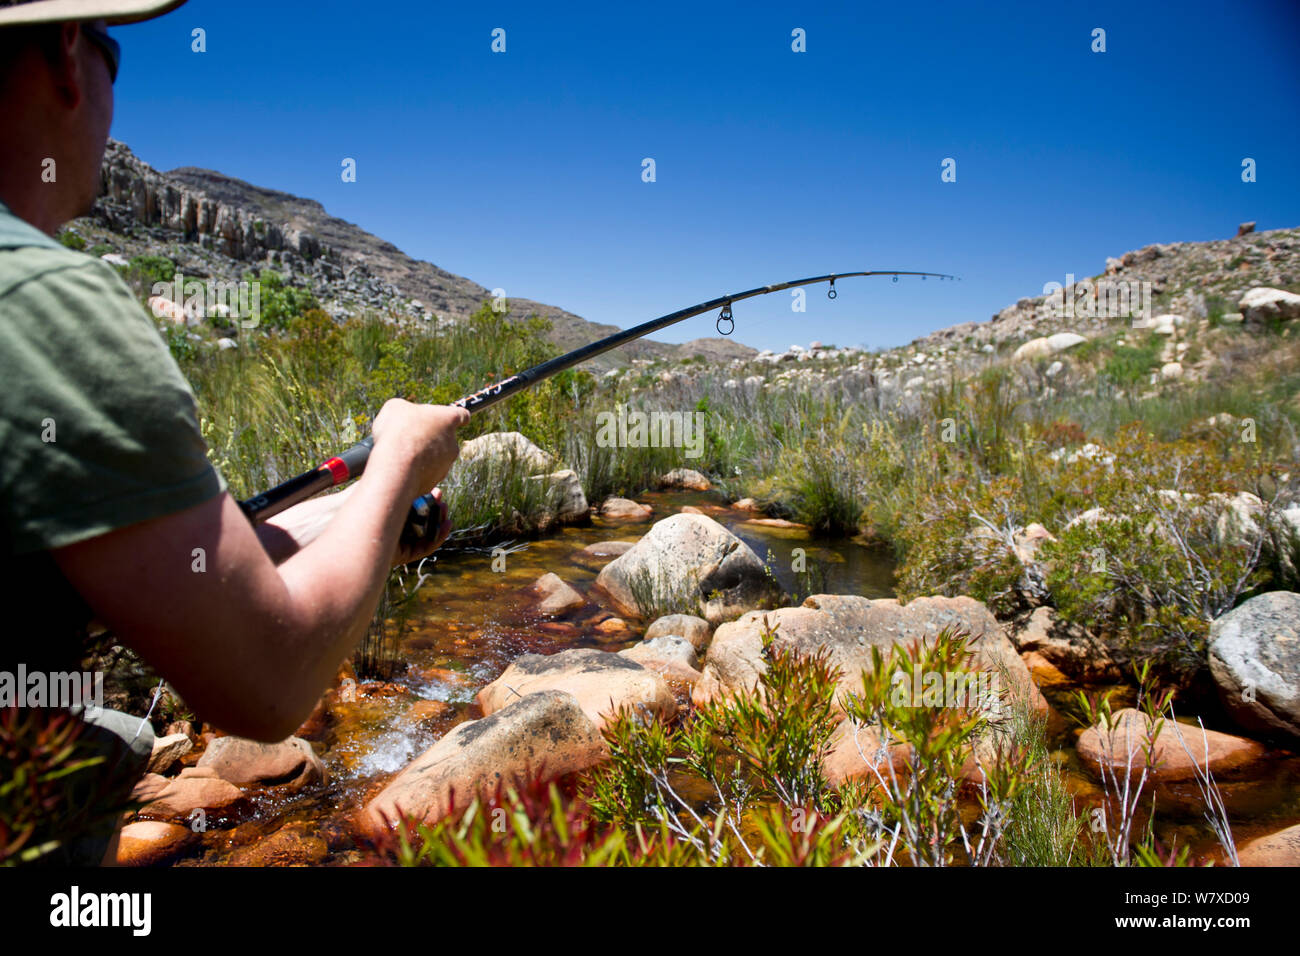 An employee from &#39;Cape Nature&#39;, a government conservation department, fishing for introduced Rainbow trout (Oncorhynchus mykiss) in an attempt to eradicate them from the Krom River, Cedarberg Mountains, Western Cape, South Africa. November 2013. Stock Photo